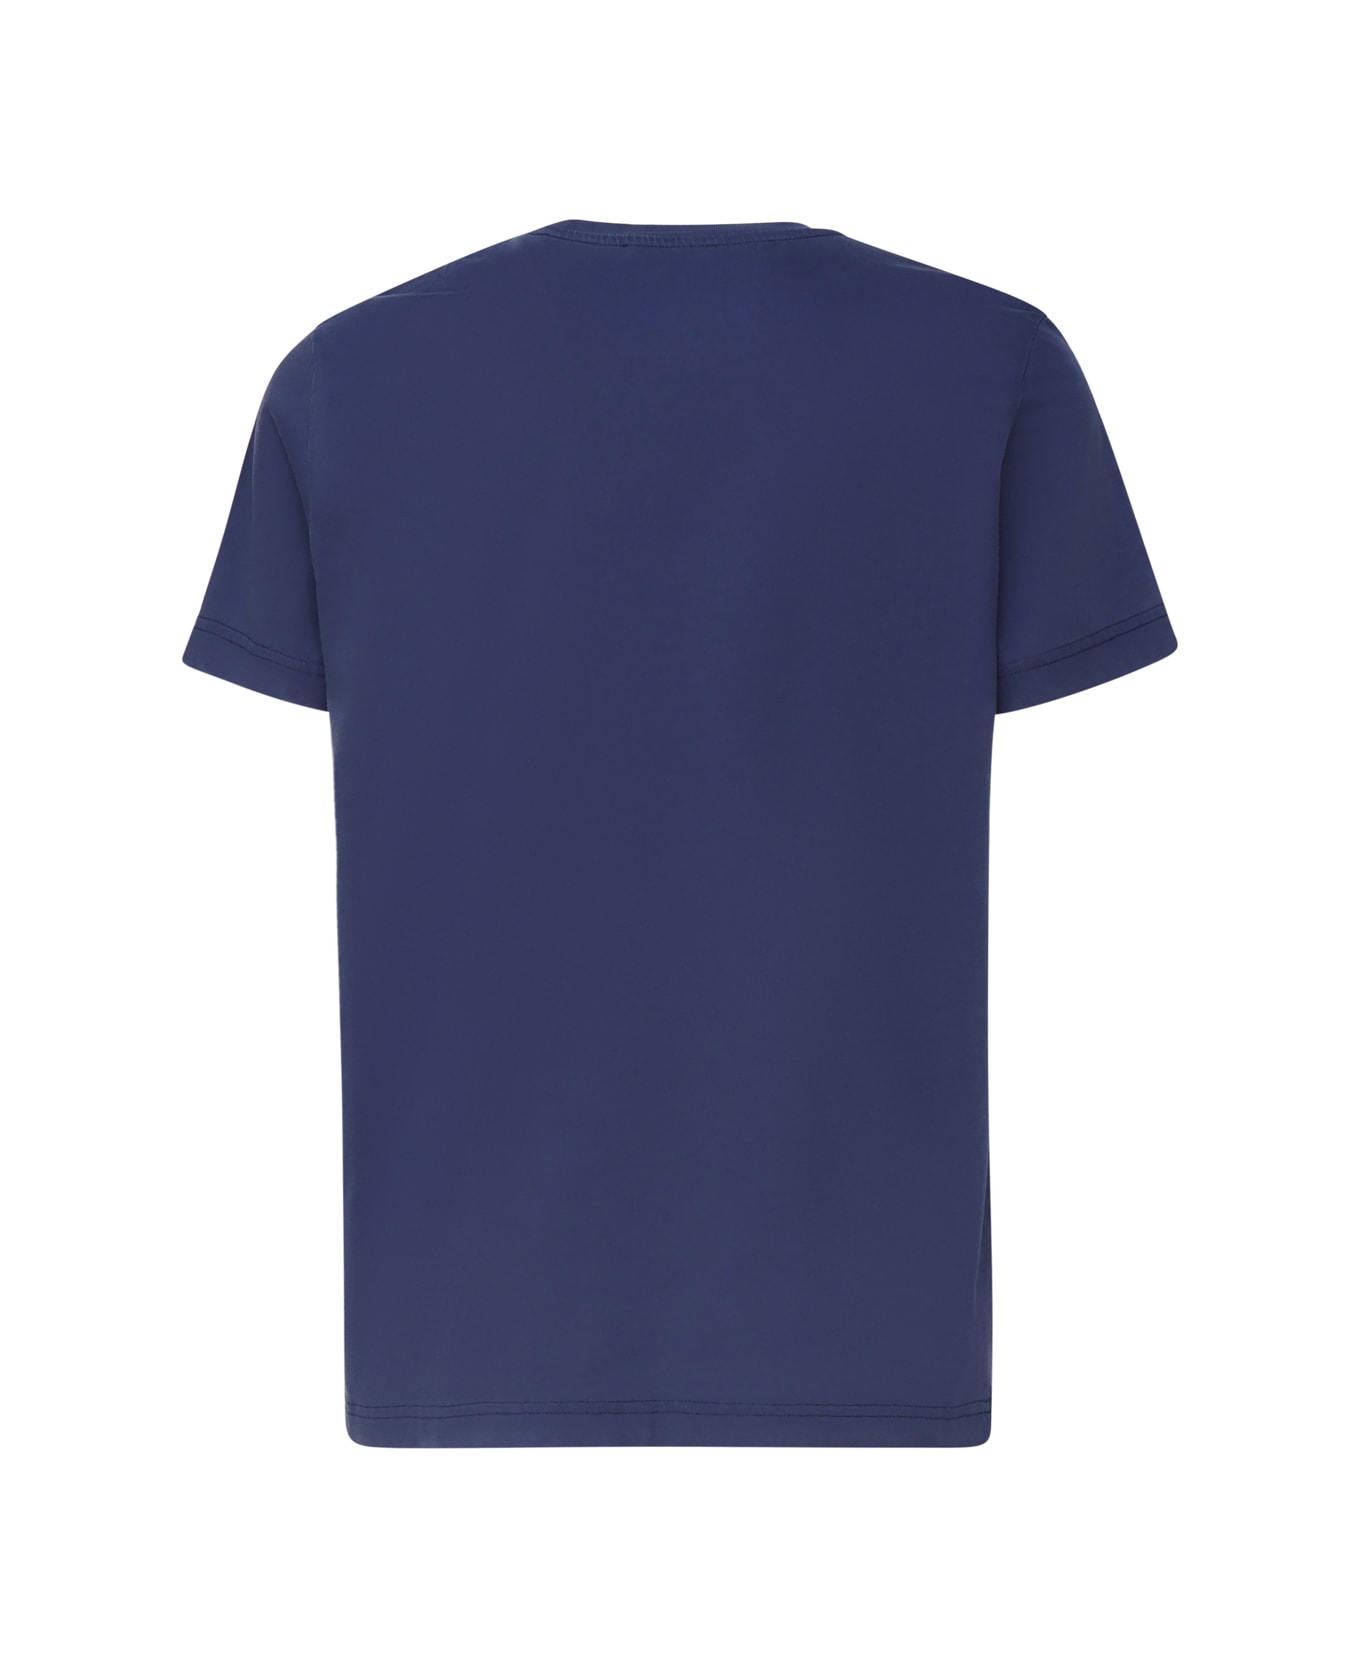 Fay T-shirt With Pocket - Blue シャツ